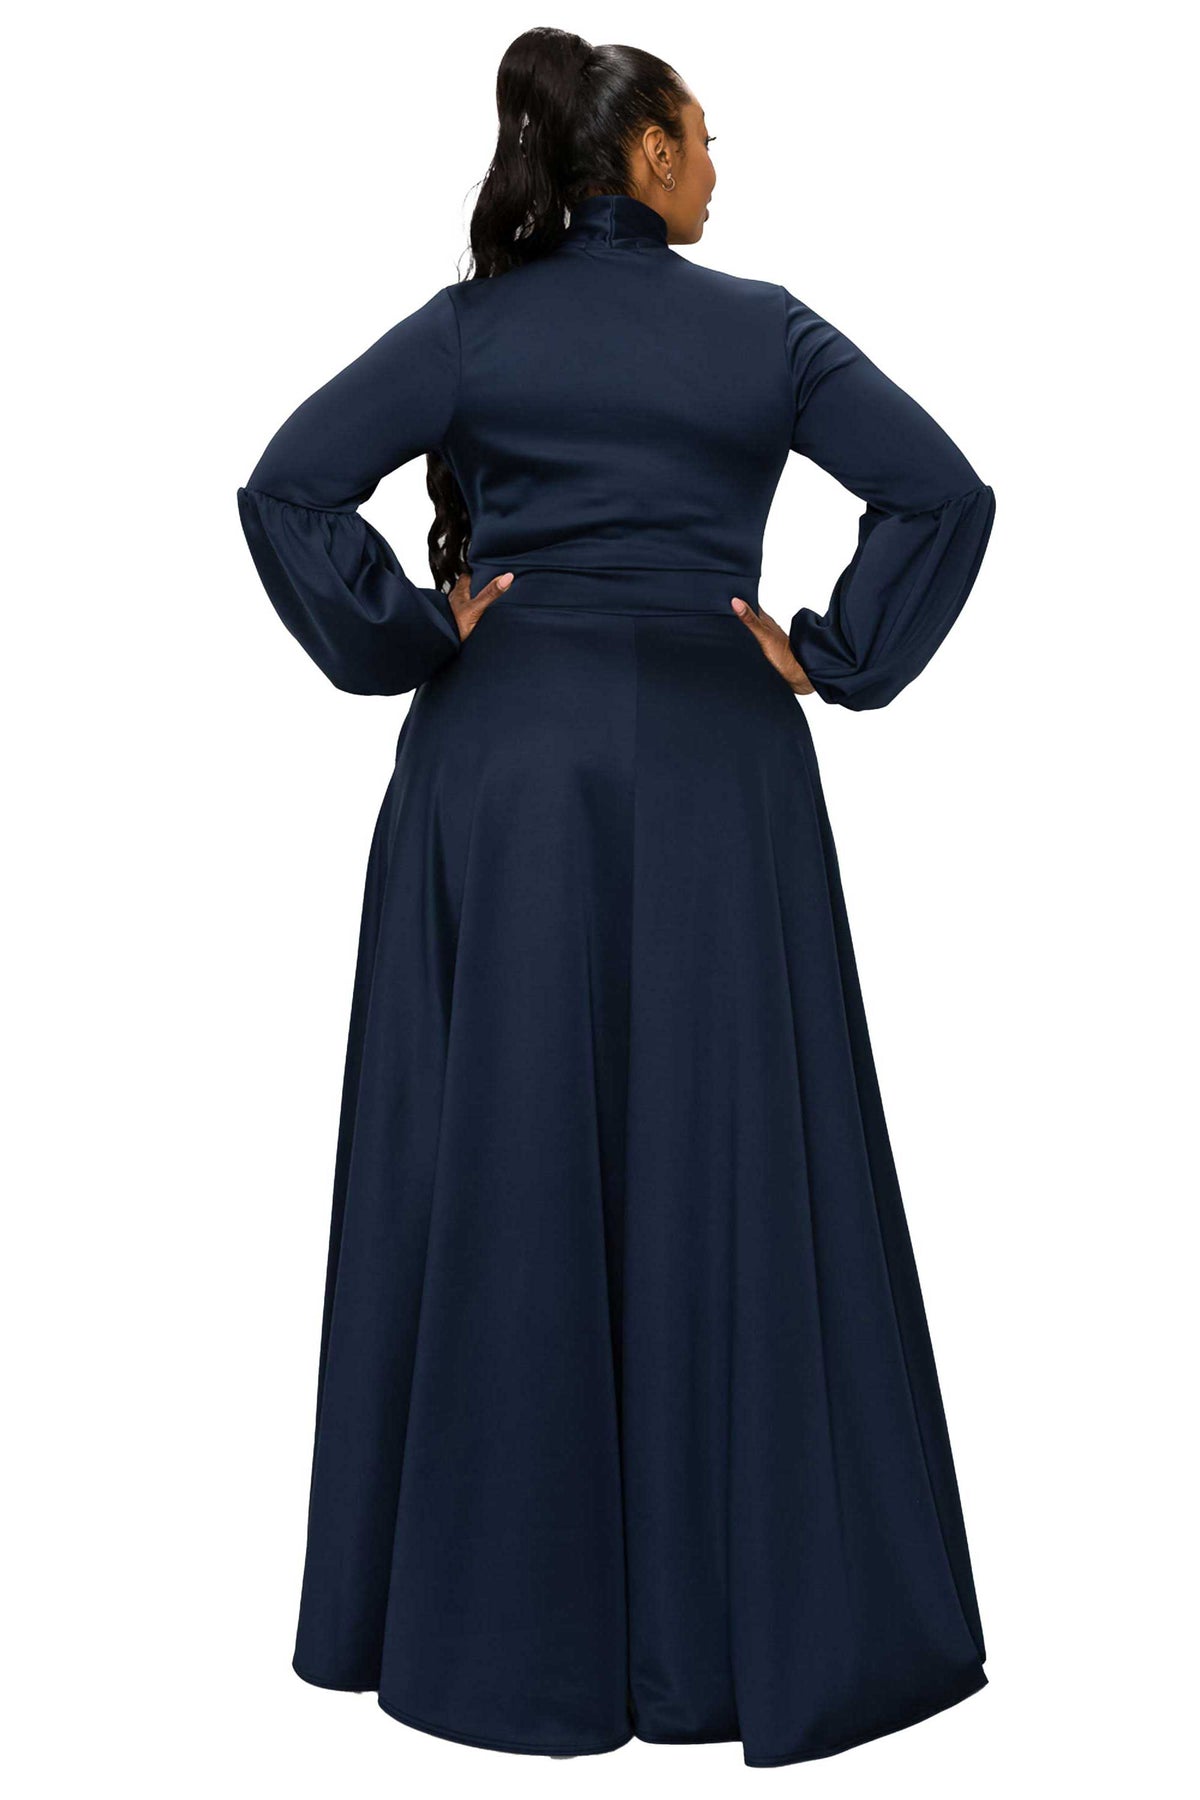 Bella Donna Dress with Ribbon and Bishop Sleeves